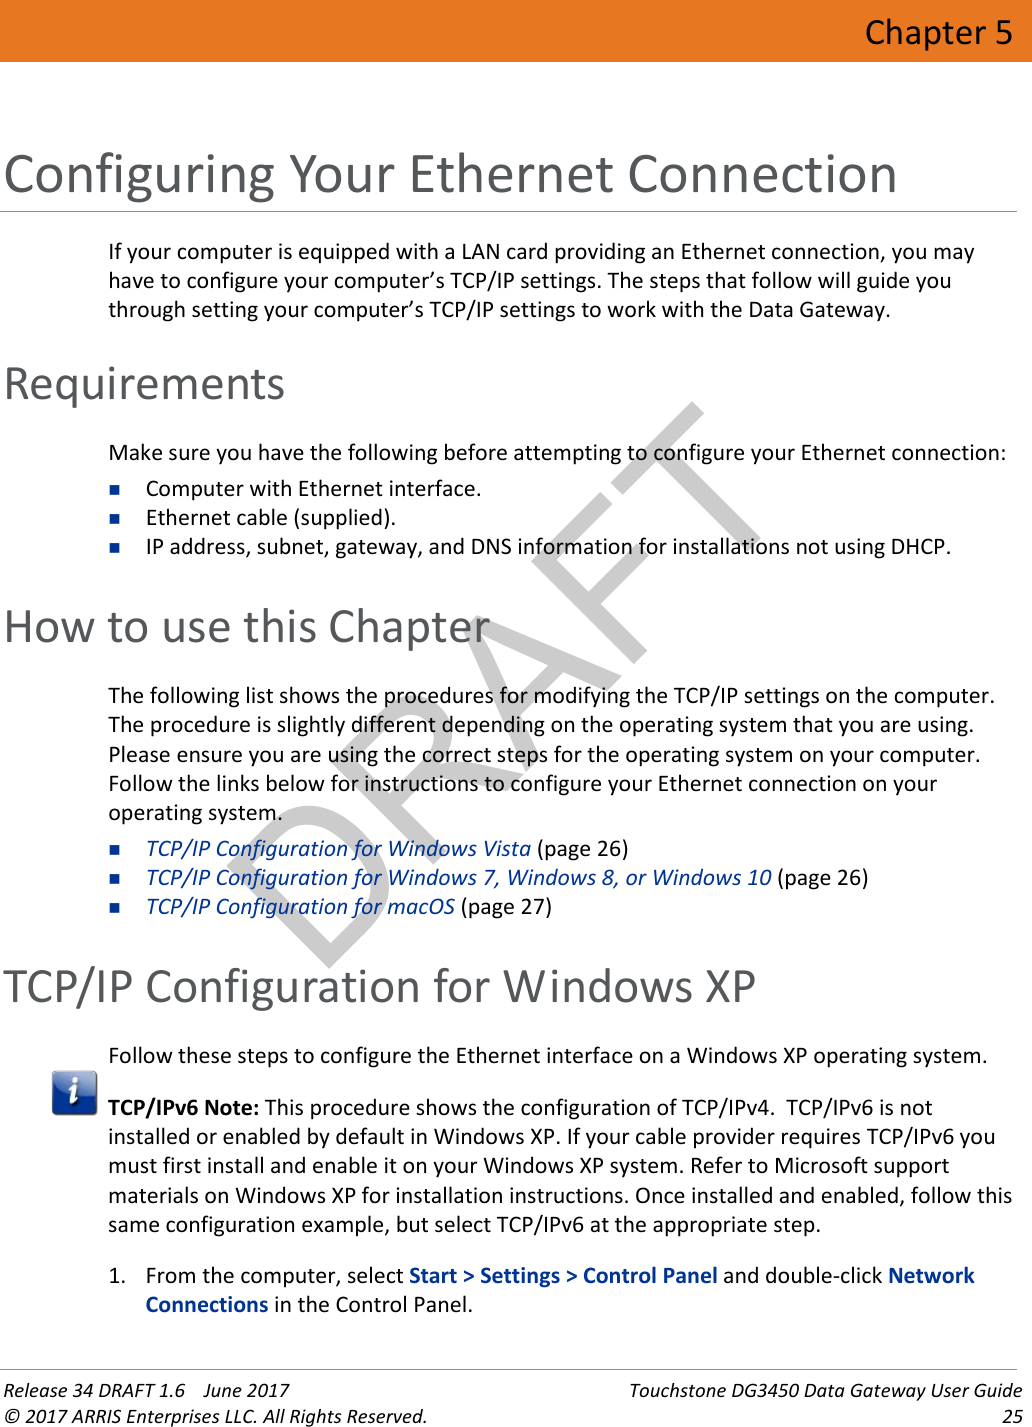 DRAFT Release 34 DRAFT 1.6    June 2017 Touchstone DG3450 Data Gateway User Guide © 2017 ARRIS Enterprises LLC. All Rights Reserved. 25  Chapter 5 Configuring Your Ethernet Connection If your computer is equipped with a LAN card providing an Ethernet connection, you may have to configure your computer’s TCP/IP settings. The steps that follow will guide you through setting your computer’s TCP/IP settings to work with the Data Gateway.   Requirements Make sure you have the following before attempting to configure your Ethernet connection:  Computer with Ethernet interface.  Ethernet cable (supplied).  IP address, subnet, gateway, and DNS information for installations not using DHCP.   How to use this Chapter The following list shows the procedures for modifying the TCP/IP settings on the computer. The procedure is slightly different depending on the operating system that you are using. Please ensure you are using the correct steps for the operating system on your computer. Follow the links below for instructions to configure your Ethernet connection on your operating system.  TCP/IP Configuration for Windows Vista (page 26)  TCP/IP Configuration for Windows 7, Windows 8, or Windows 10 (page 26)  TCP/IP Configuration for macOS (page 27)   TCP/IP Configuration for Windows XP Follow these steps to configure the Ethernet interface on a Windows XP operating system.  TCP/IPv6 Note: This procedure shows the configuration of TCP/IPv4.  TCP/IPv6 is not installed or enabled by default in Windows XP. If your cable provider requires TCP/IPv6 you must first install and enable it on your Windows XP system. Refer to Microsoft support materials on Windows XP for installation instructions. Once installed and enabled, follow this same configuration example, but select TCP/IPv6 at the appropriate step.  1. From the computer, select Start &gt; Settings &gt; Control Panel and double-click Network Connections in the Control Panel. 